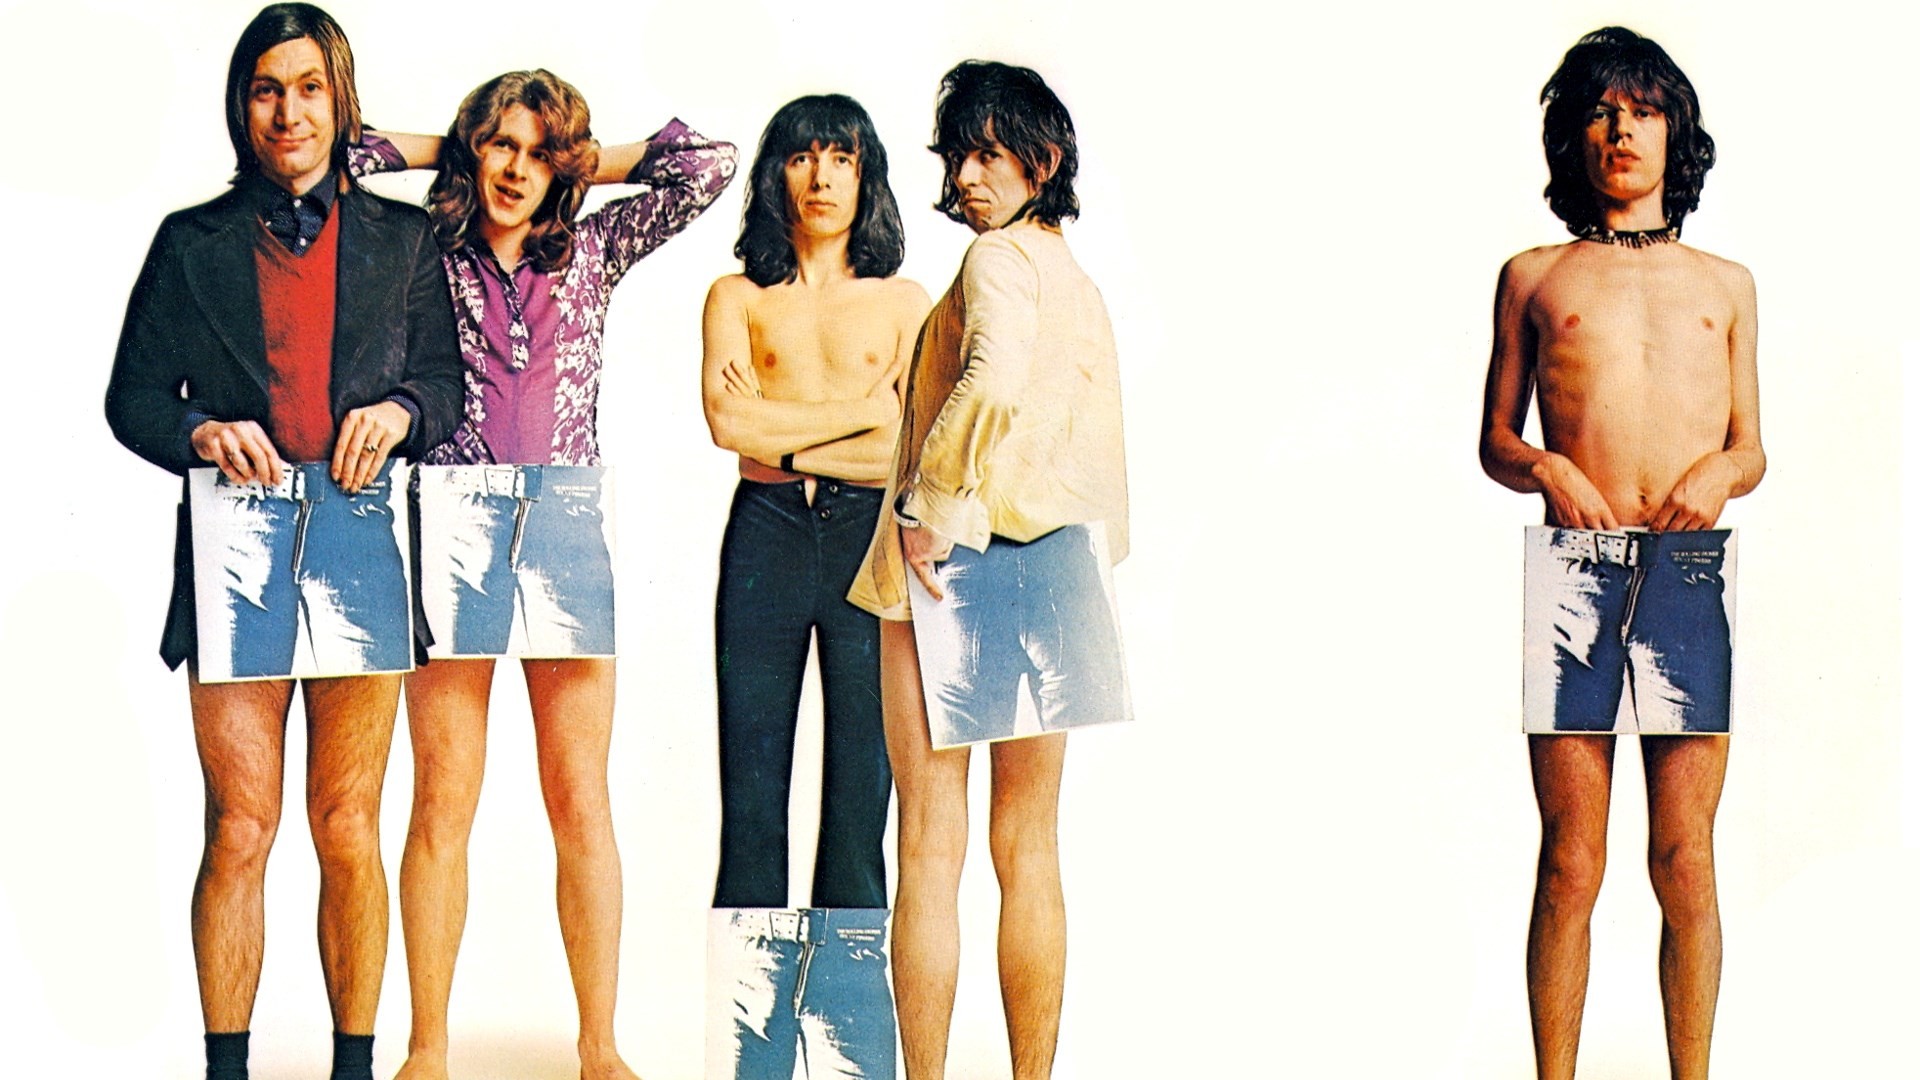 1920x1080 Quality Cool the rolling stones